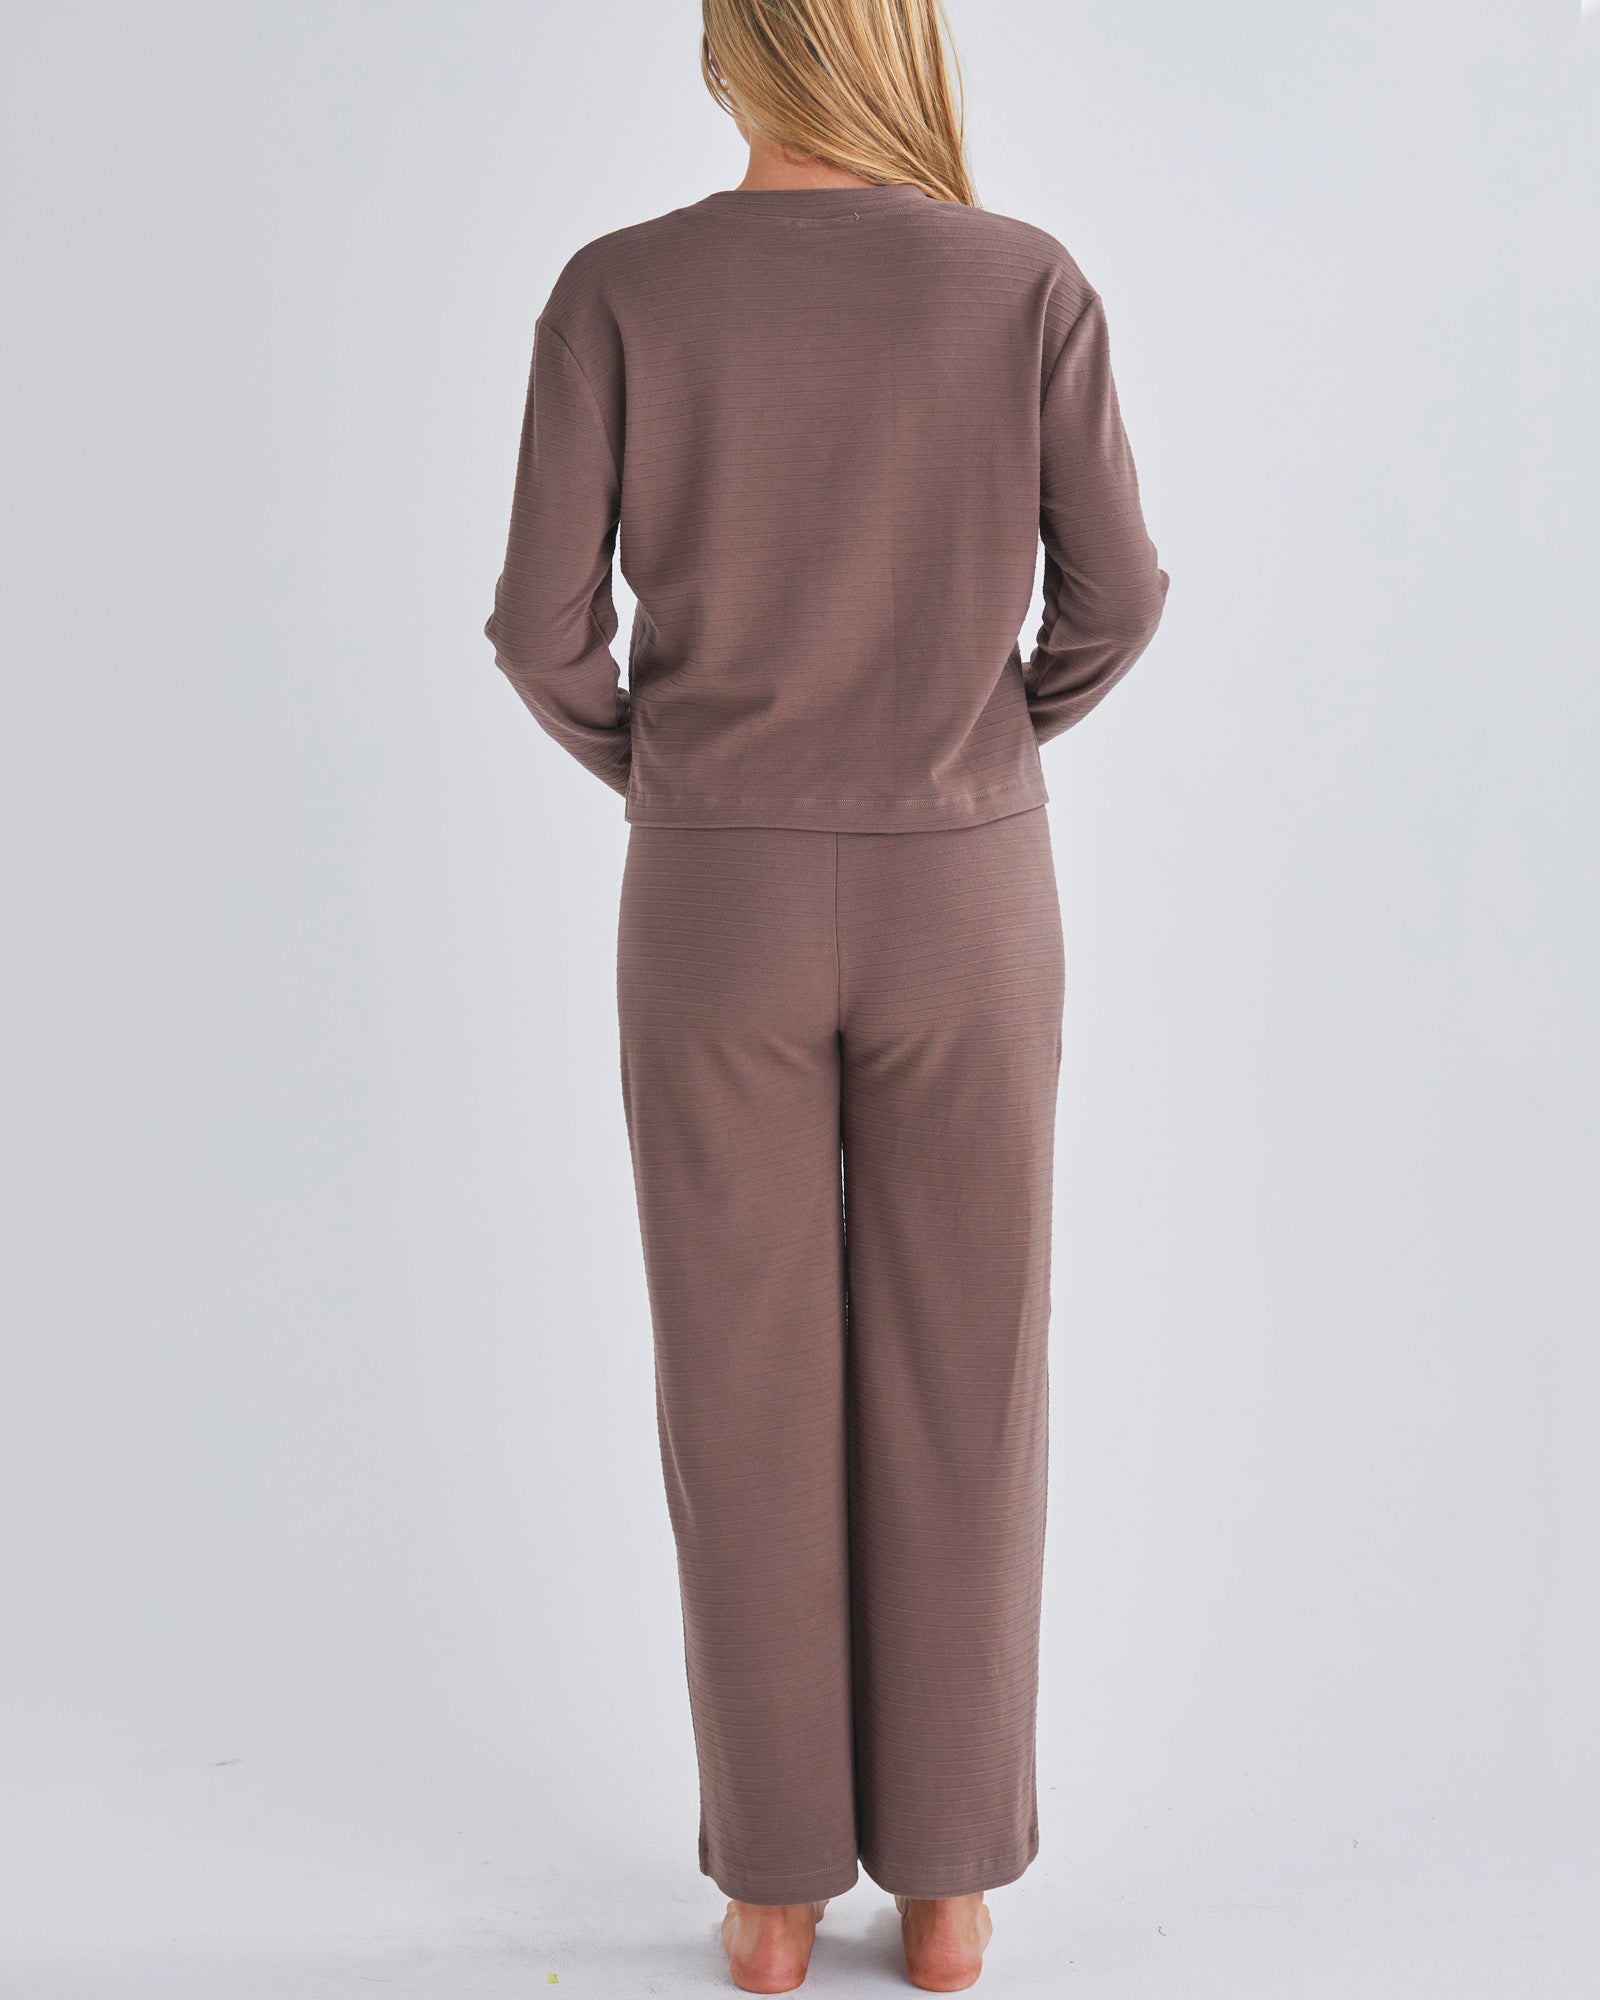 Back View - A pregnant Woman Wearing 2-piece Maternity Winter Lounge Set in Taupe from Angel Maternity